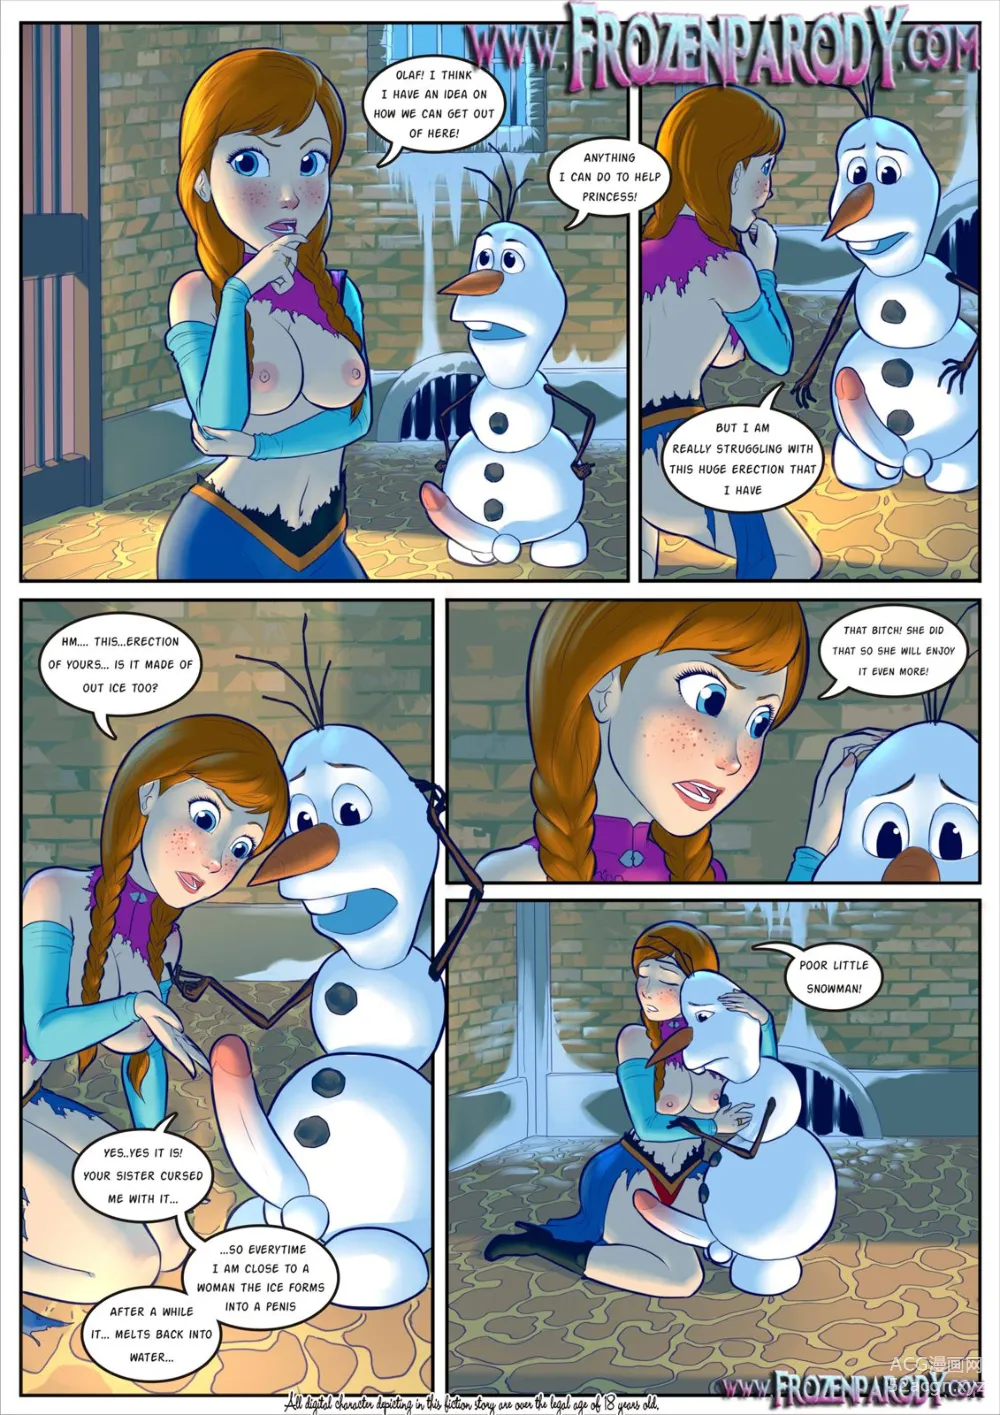 For The Kingdom - Chapter 3 (Frozen) - Western Porn Comics Western Adult  Comix